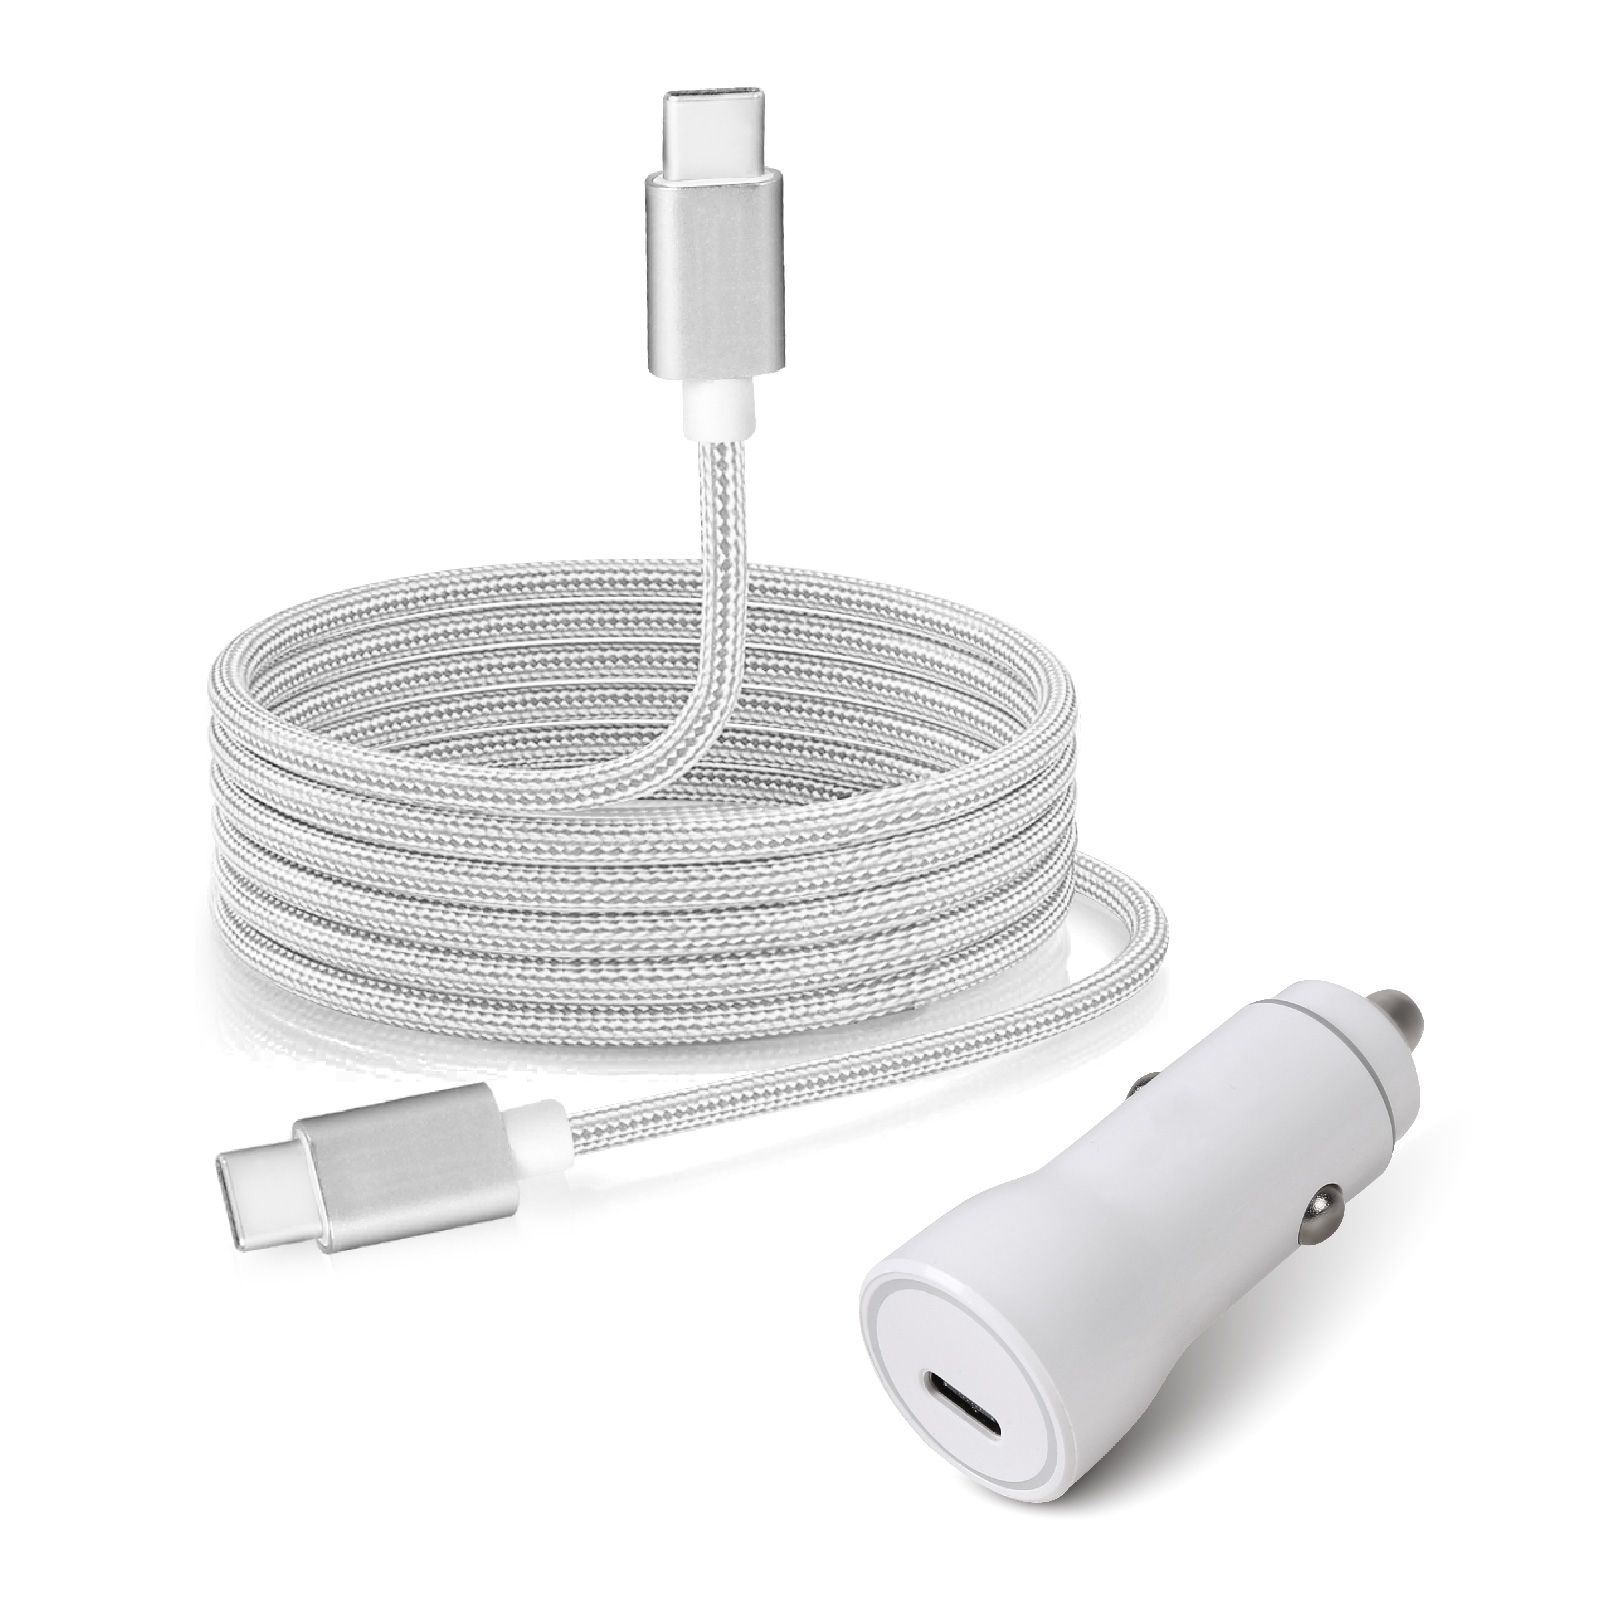 Type-C Cable & Car Charger Combo